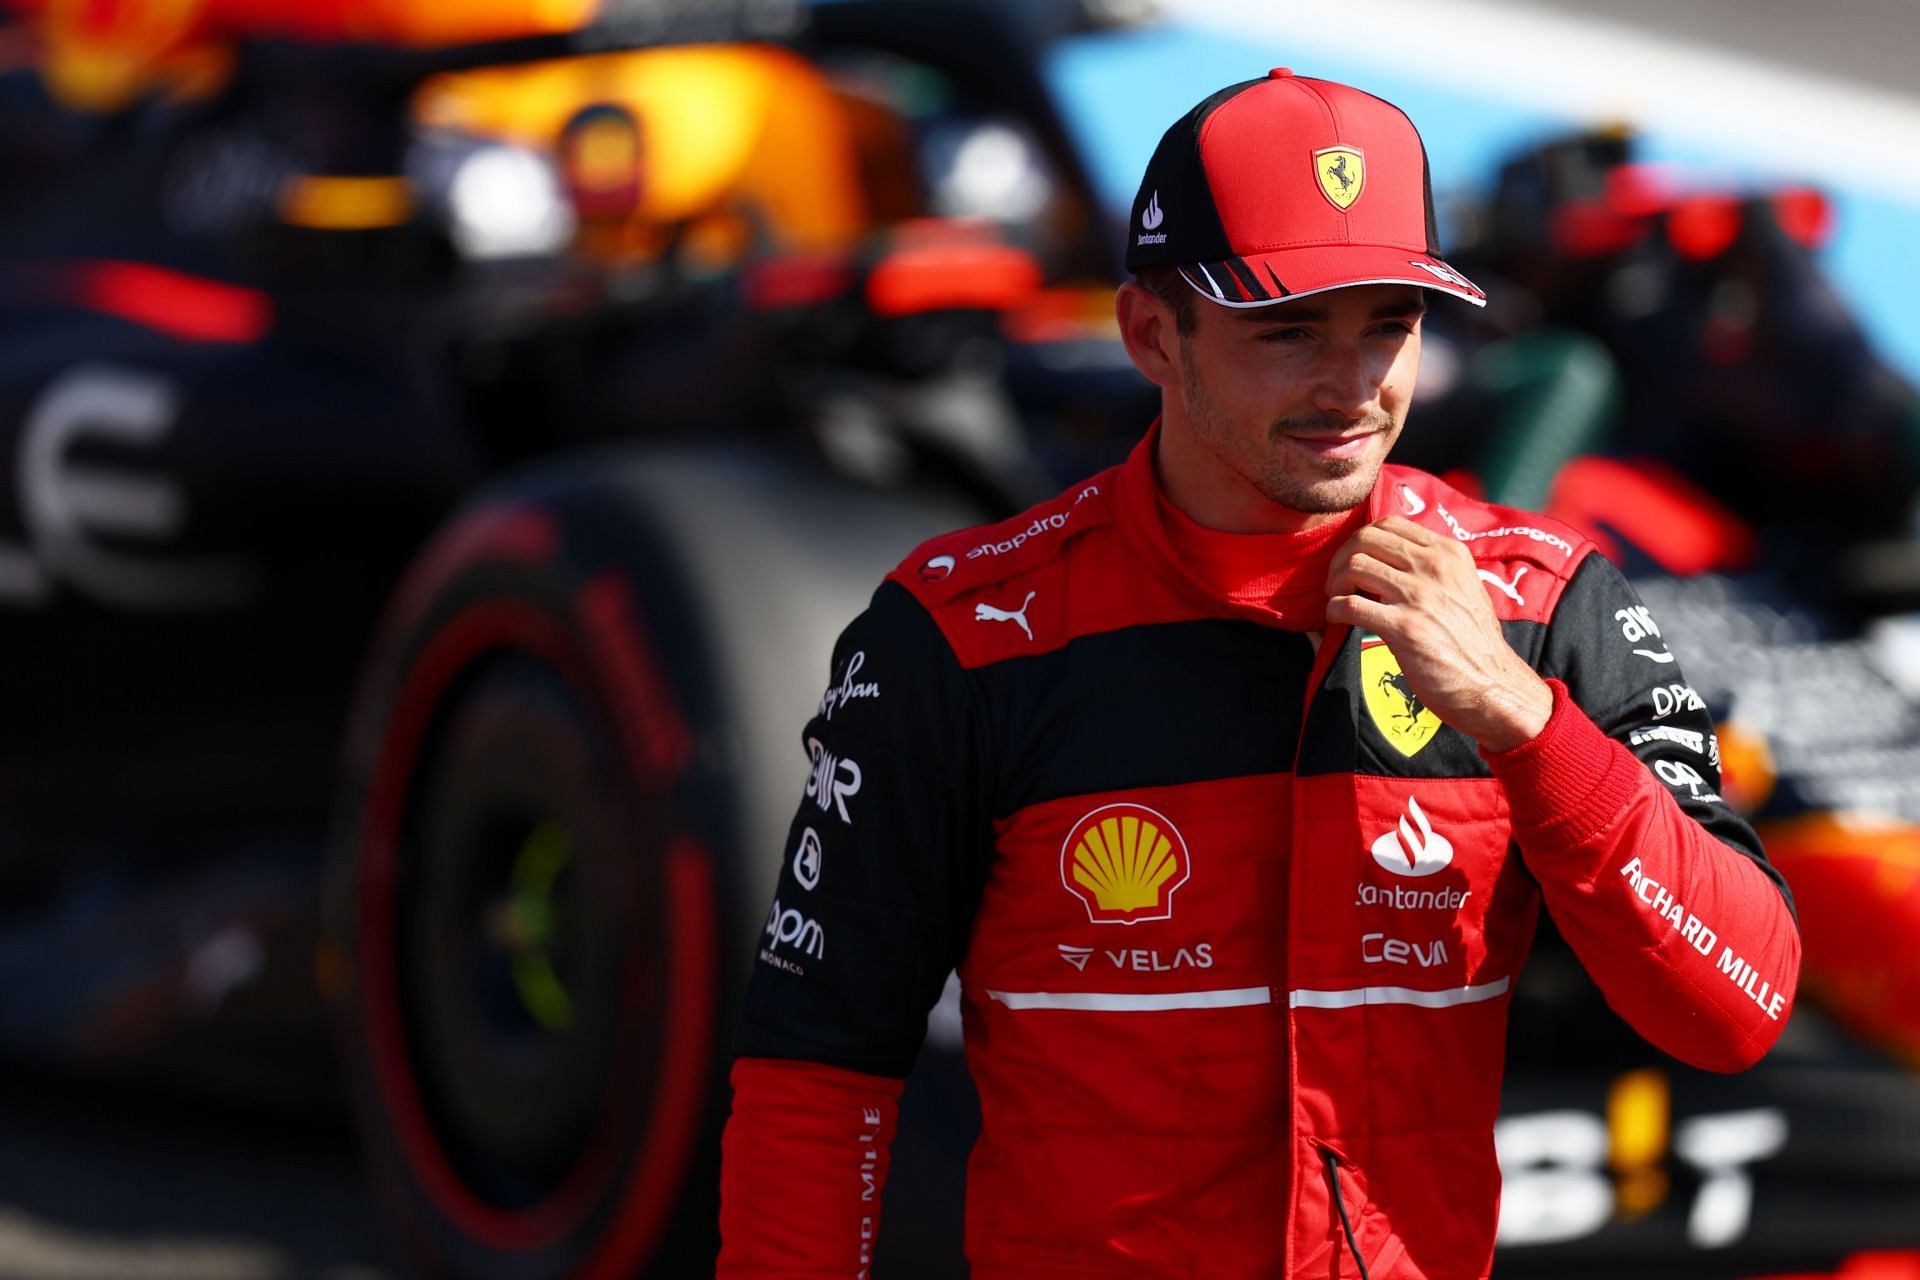 Pole position qualifier Charles Leclerc celebrates in parc ferme during qualifying ahead of the F1 Grand Prix of France at Circuit Paul Ricard on July 23, 2022, in Le Castellet, France (Photo by Clive Rose/Getty Images)